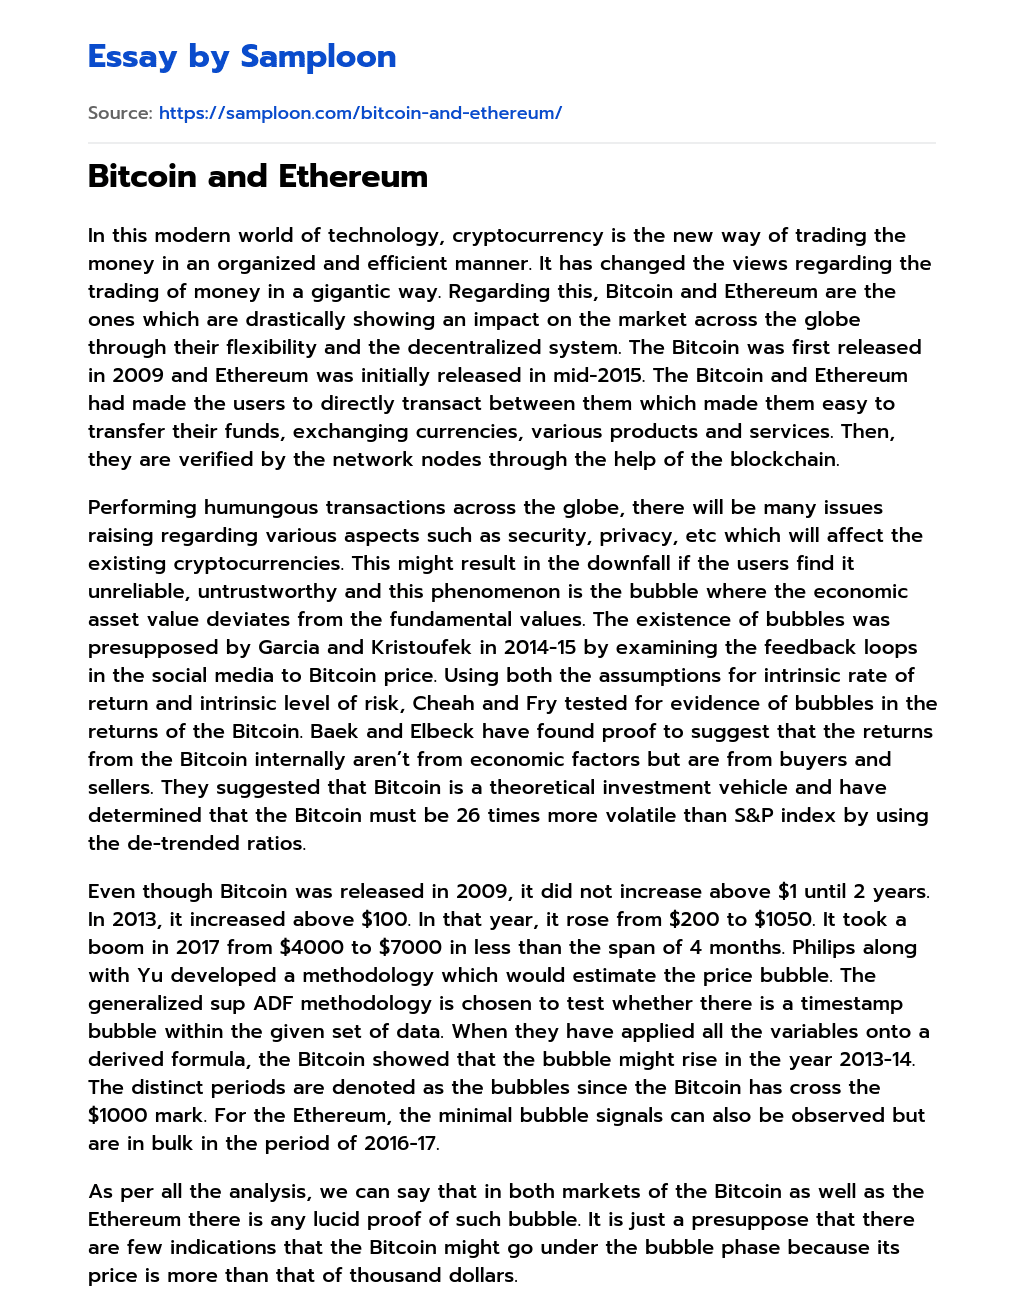 Bitcoin and Ethereum essay